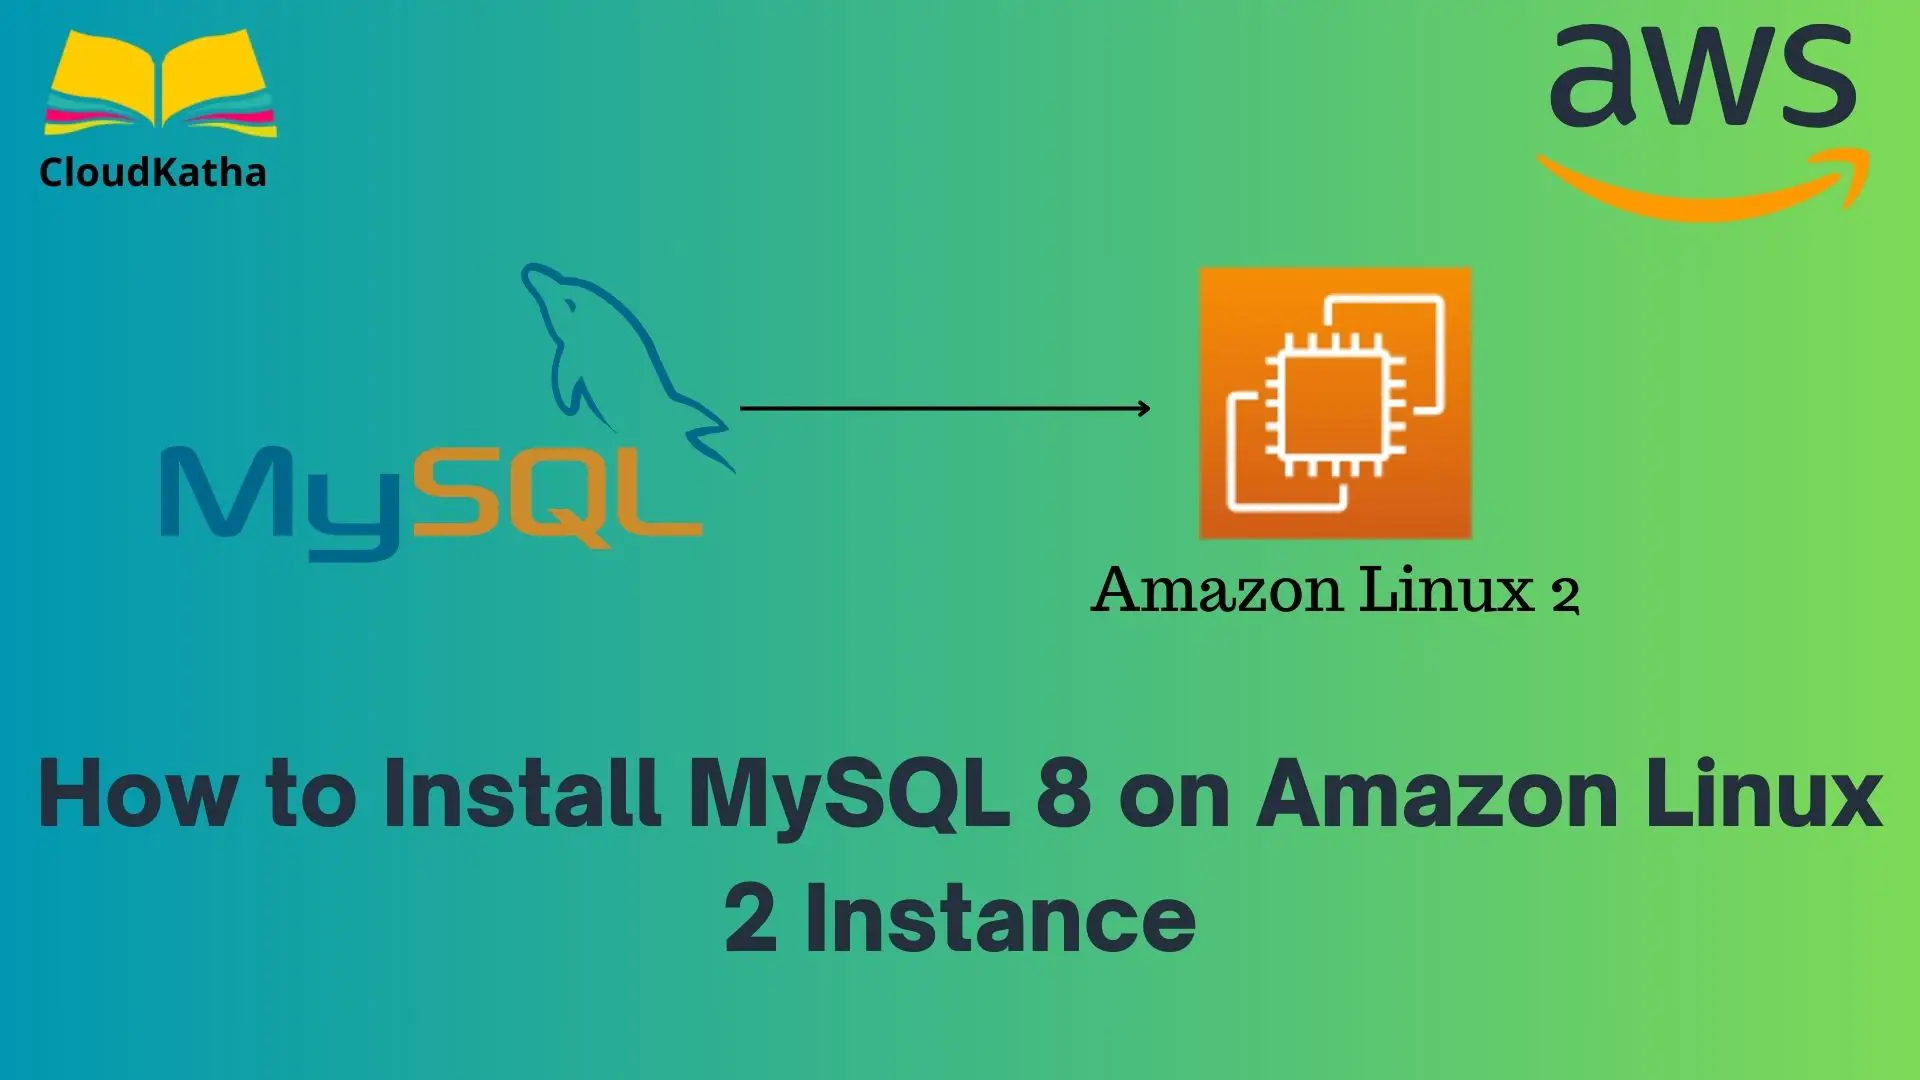 How to Install MySQL 8 on Amazon Linux 2 Instance